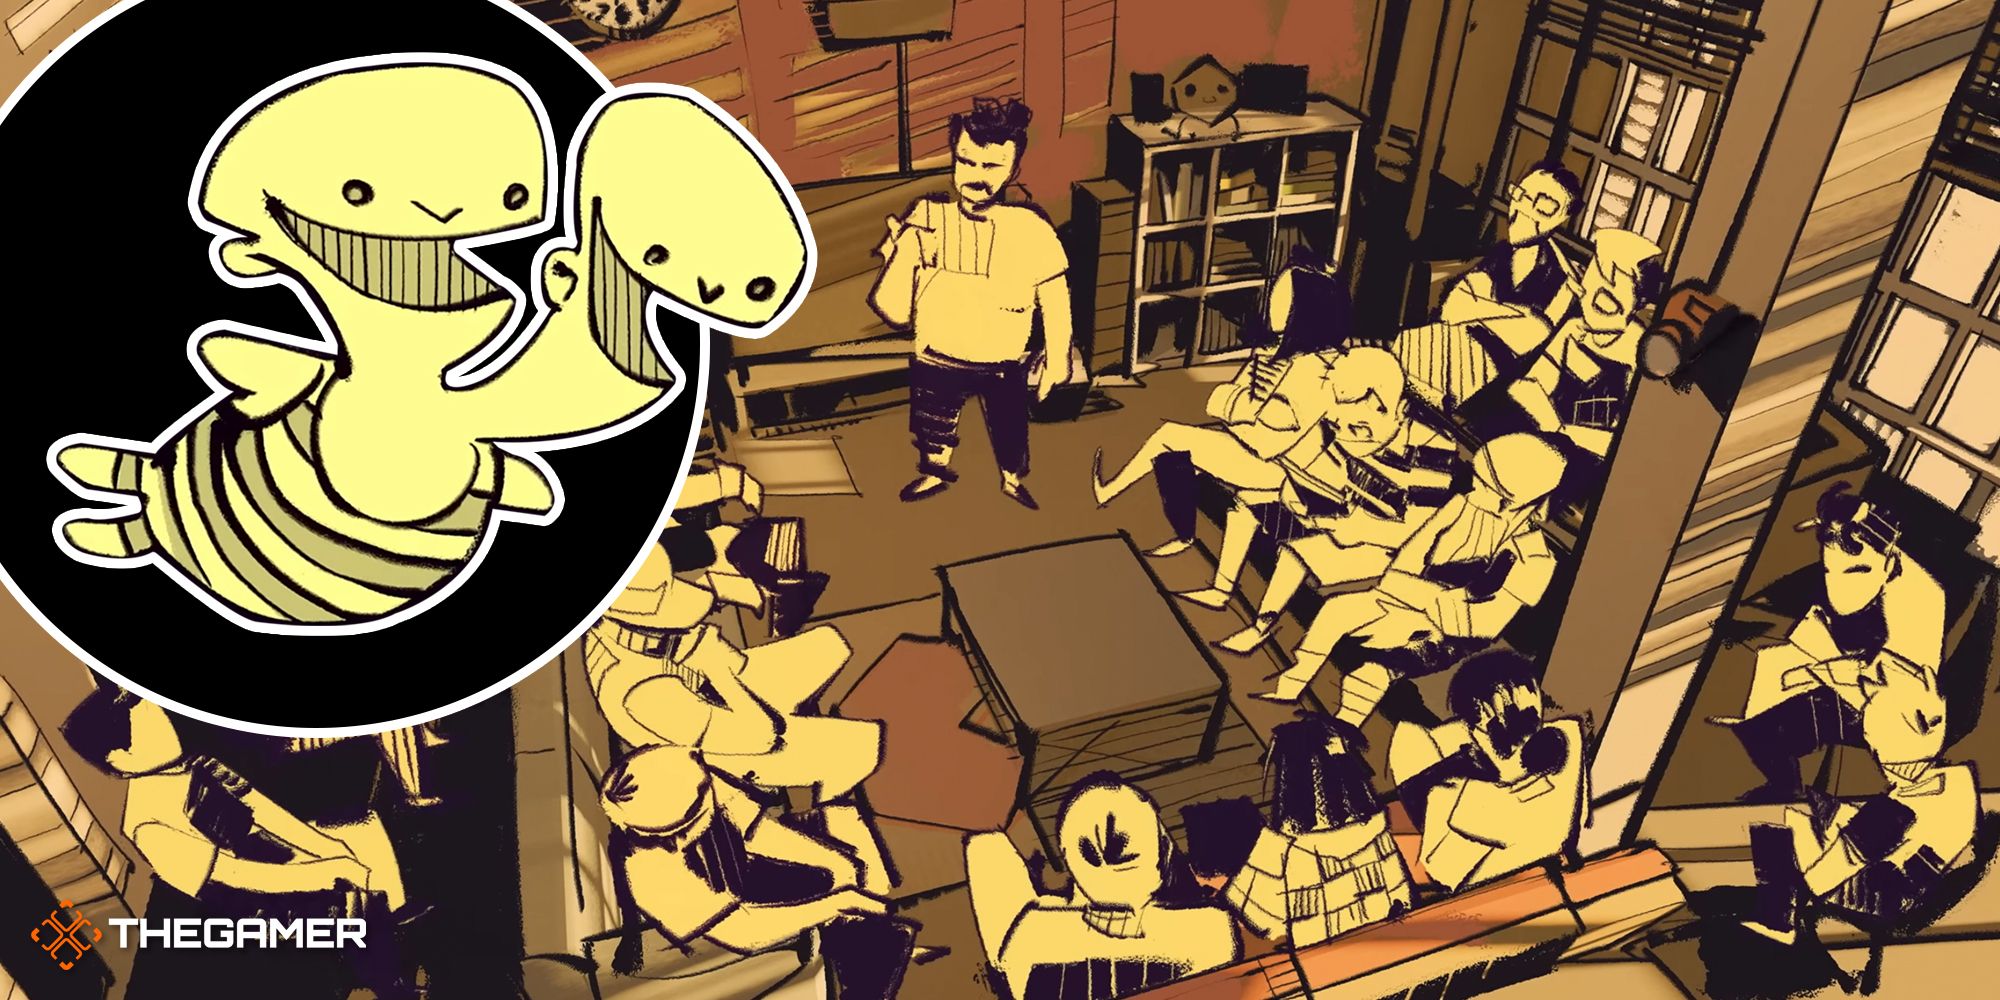 An illustration of Double Fine in a meeting room with the Double Fine logo in the top left corner